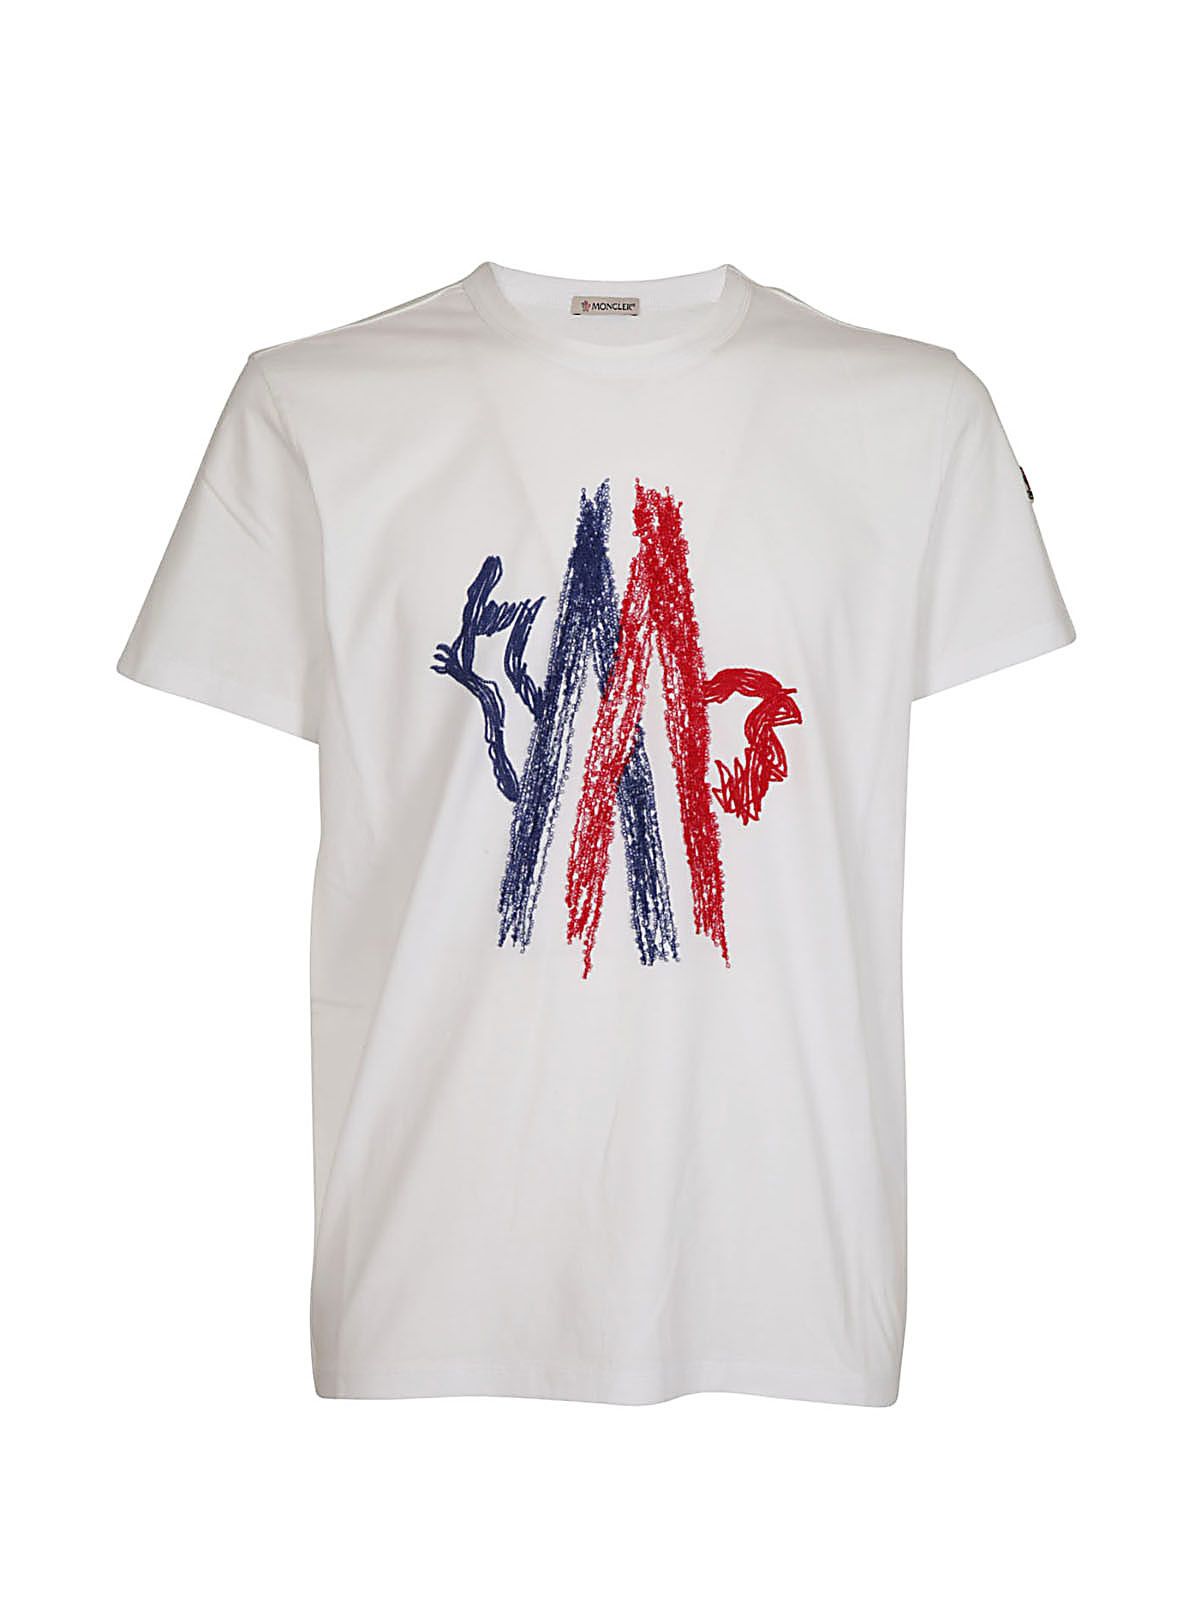 Moncler Embroidered Mountain Logo Crewneck T-Shirt, White/Red/Blue In ...